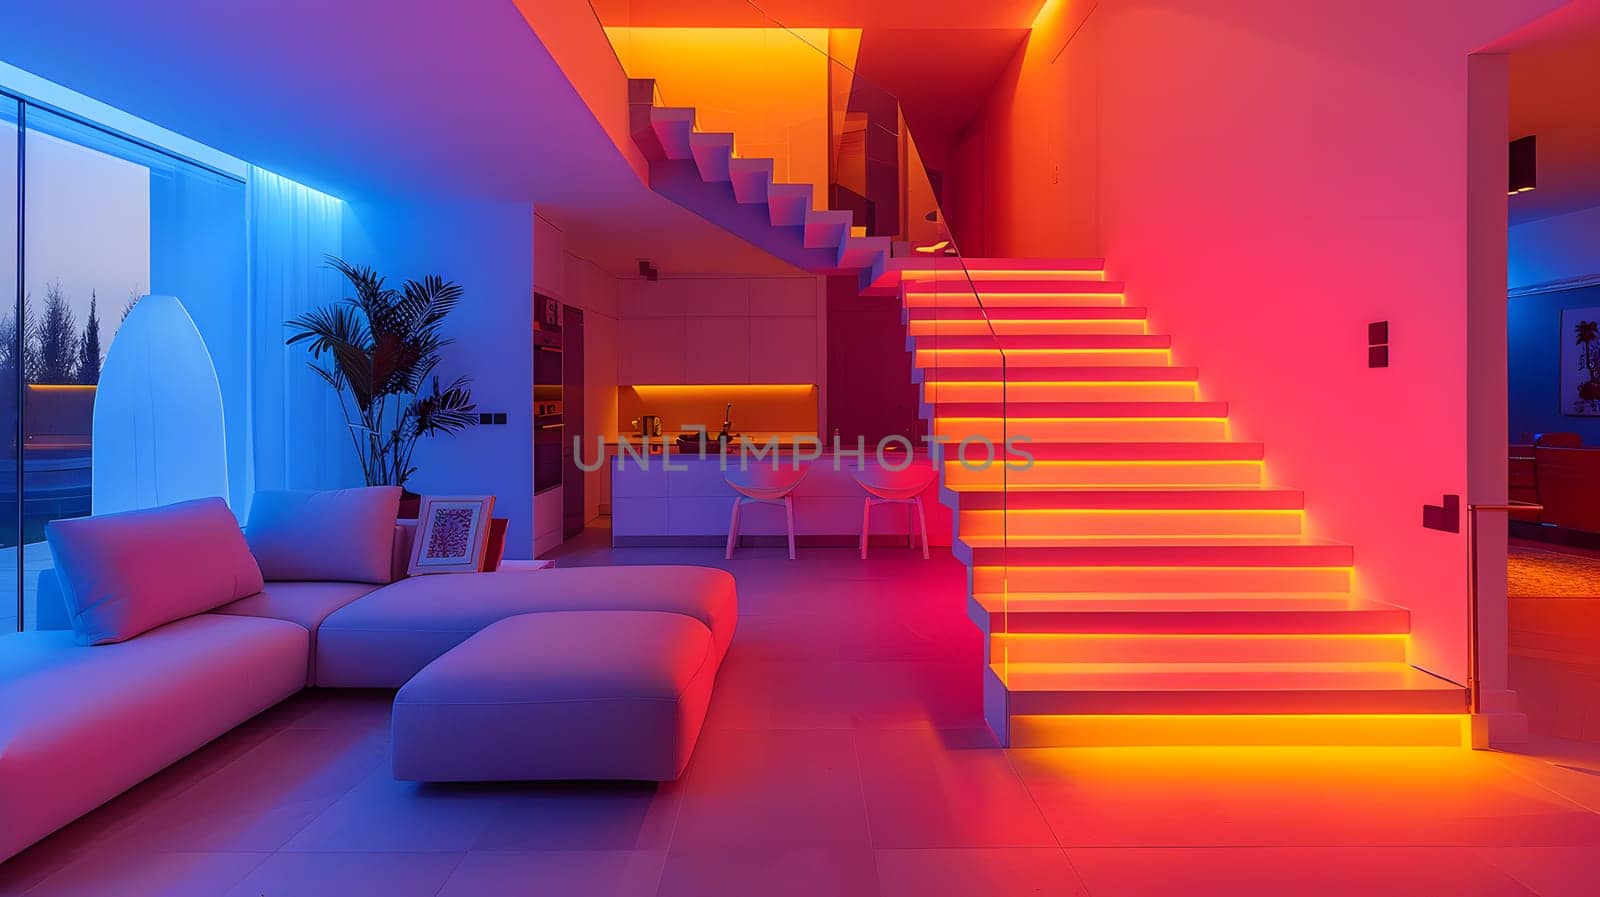 A house featuring colorful lights, a staircase, and an electric blue door. The entertainment room has magenta and purple hues, with a high ceiling and unique flooring